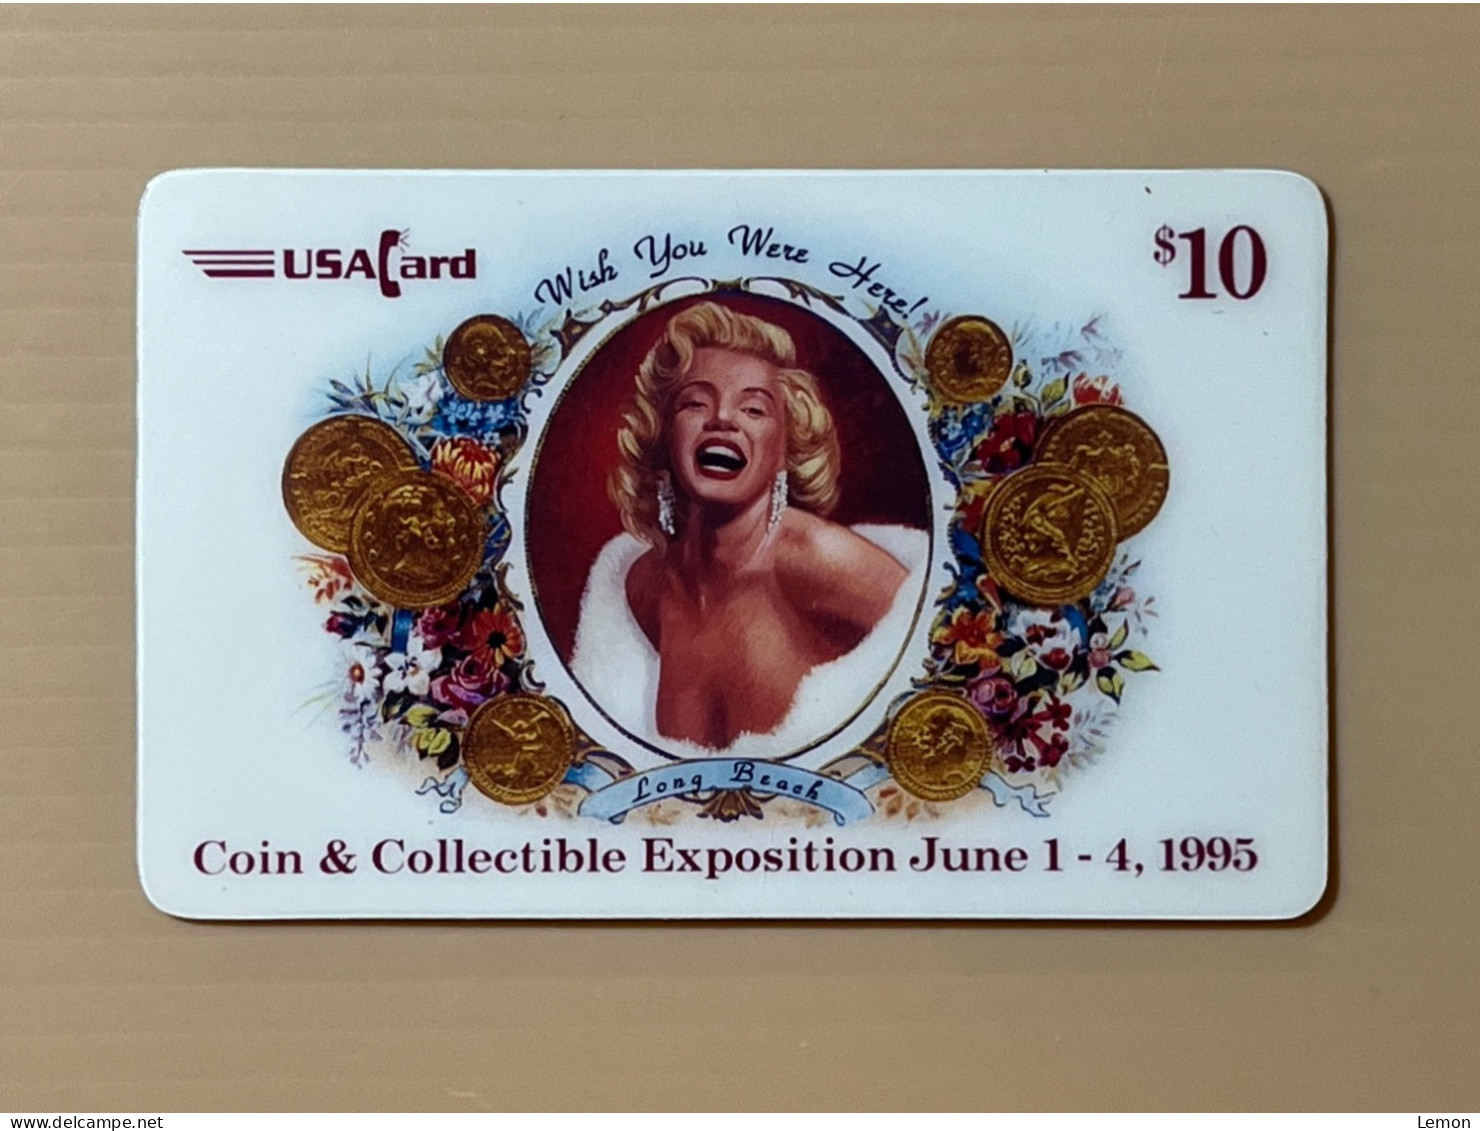 Mint USA UNITED STATES America Prepaid Telecard Phonecard, Coin & Collectible Expo 1995, Set Of 1 Mint Card With Folder - Collections